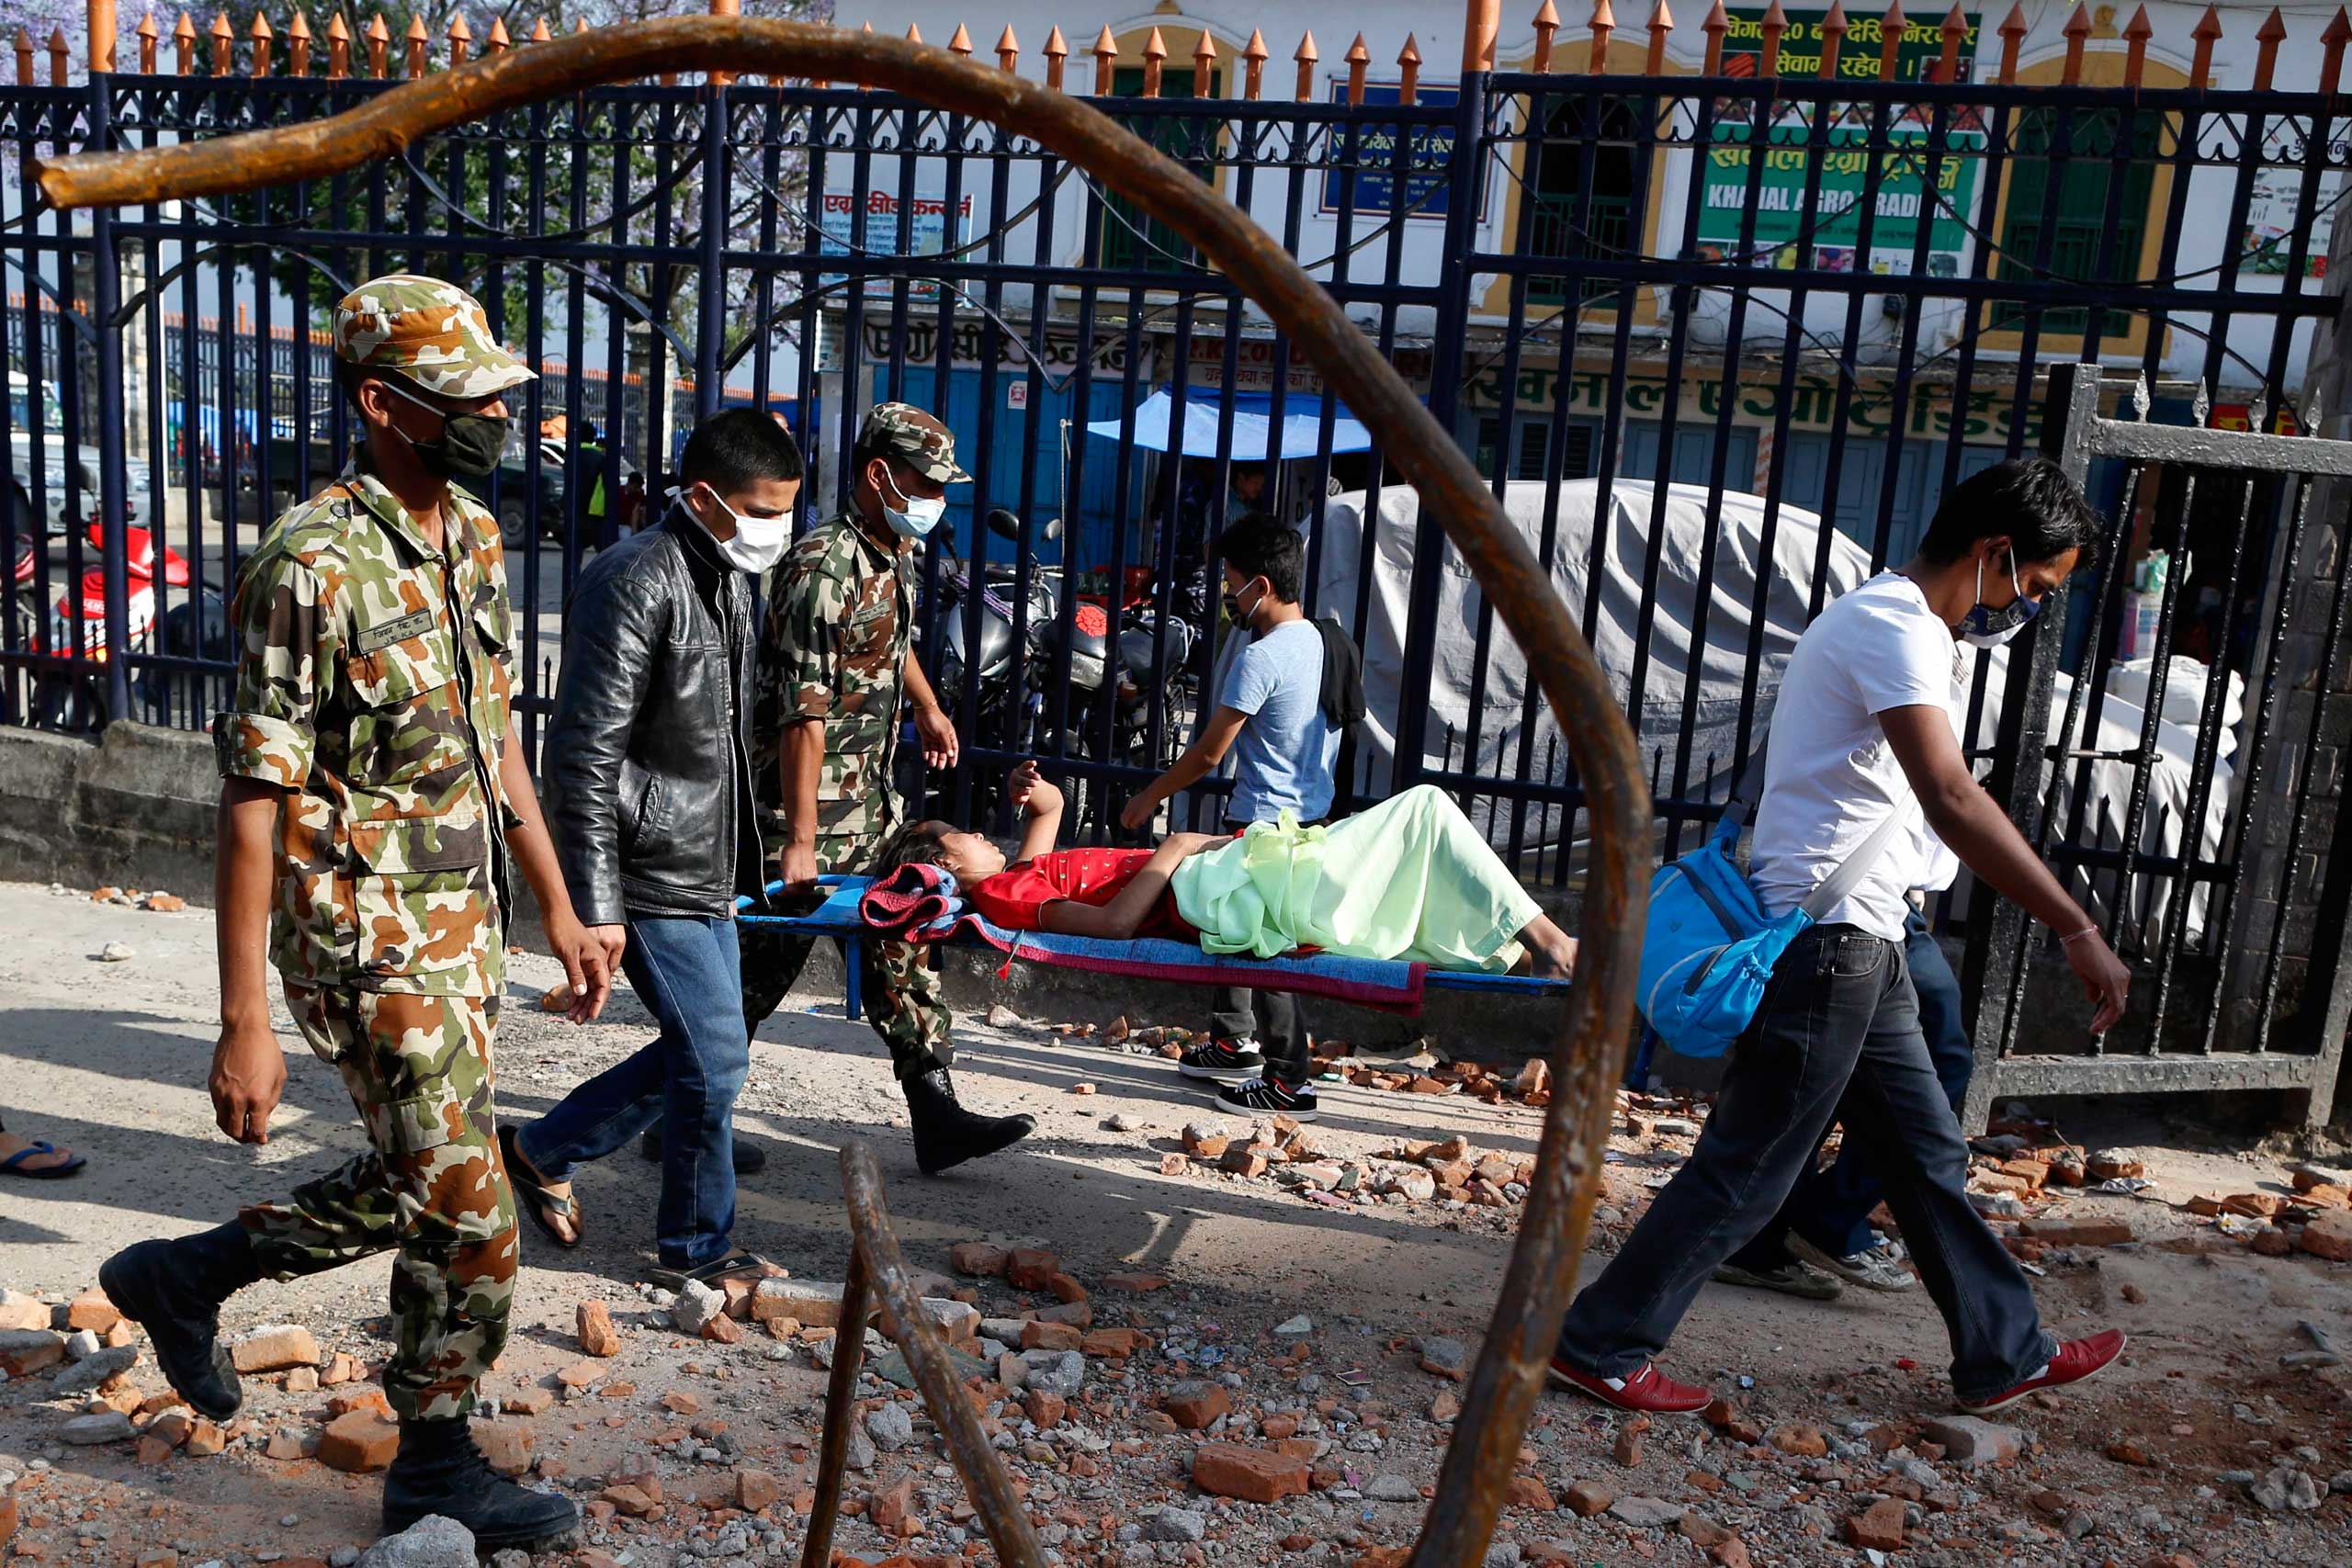 A patient is carried by Nepalese military personnel and volunteers back to the hospital building after she had been evacuated when an earthquake hit, in Kathmandu on May 12, 2015.